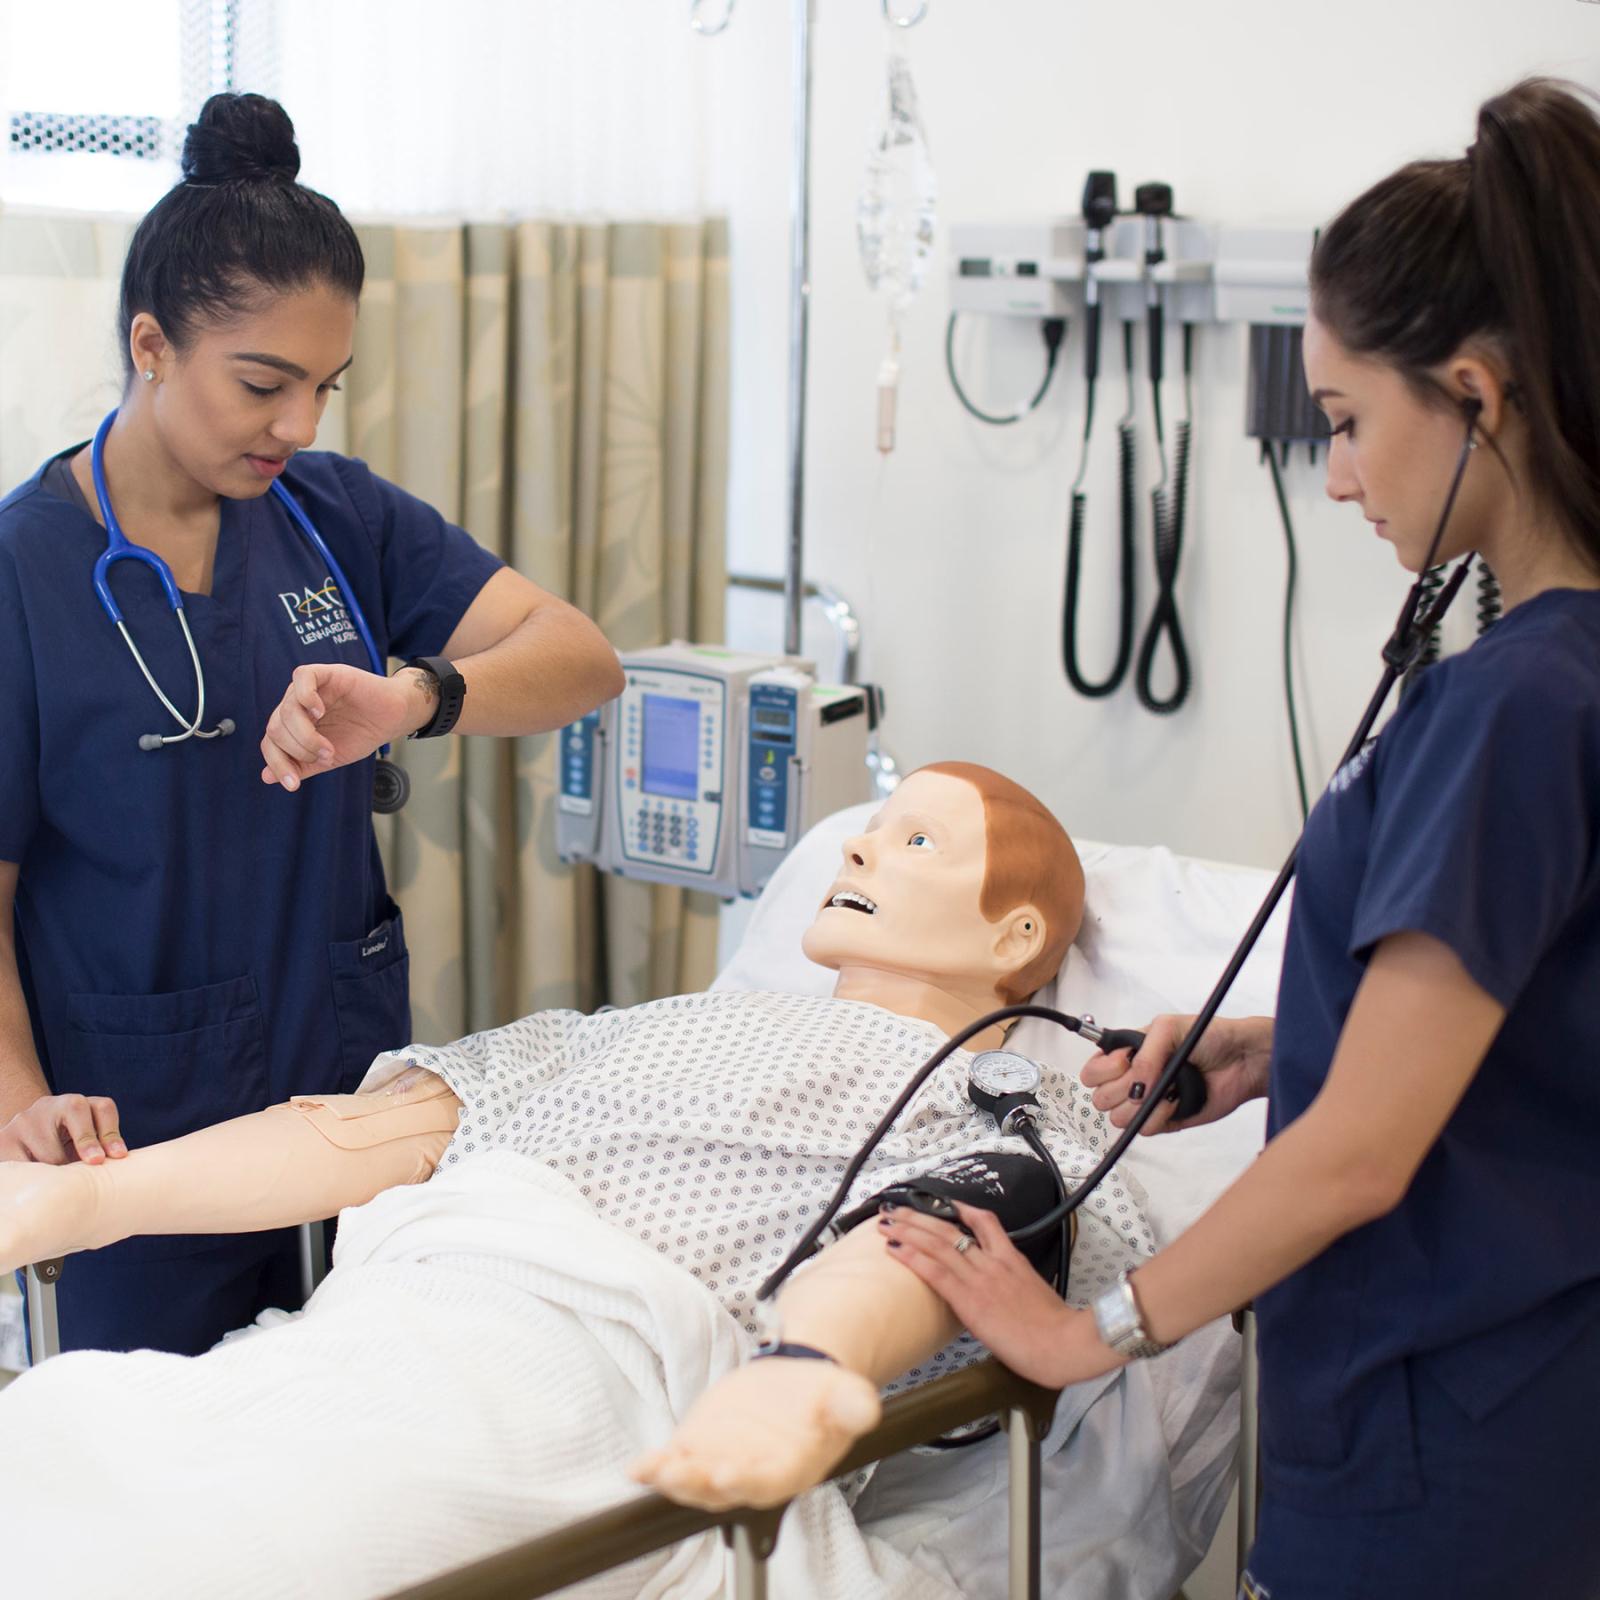 Two nursing students woking on a manikin in the simulation lab.